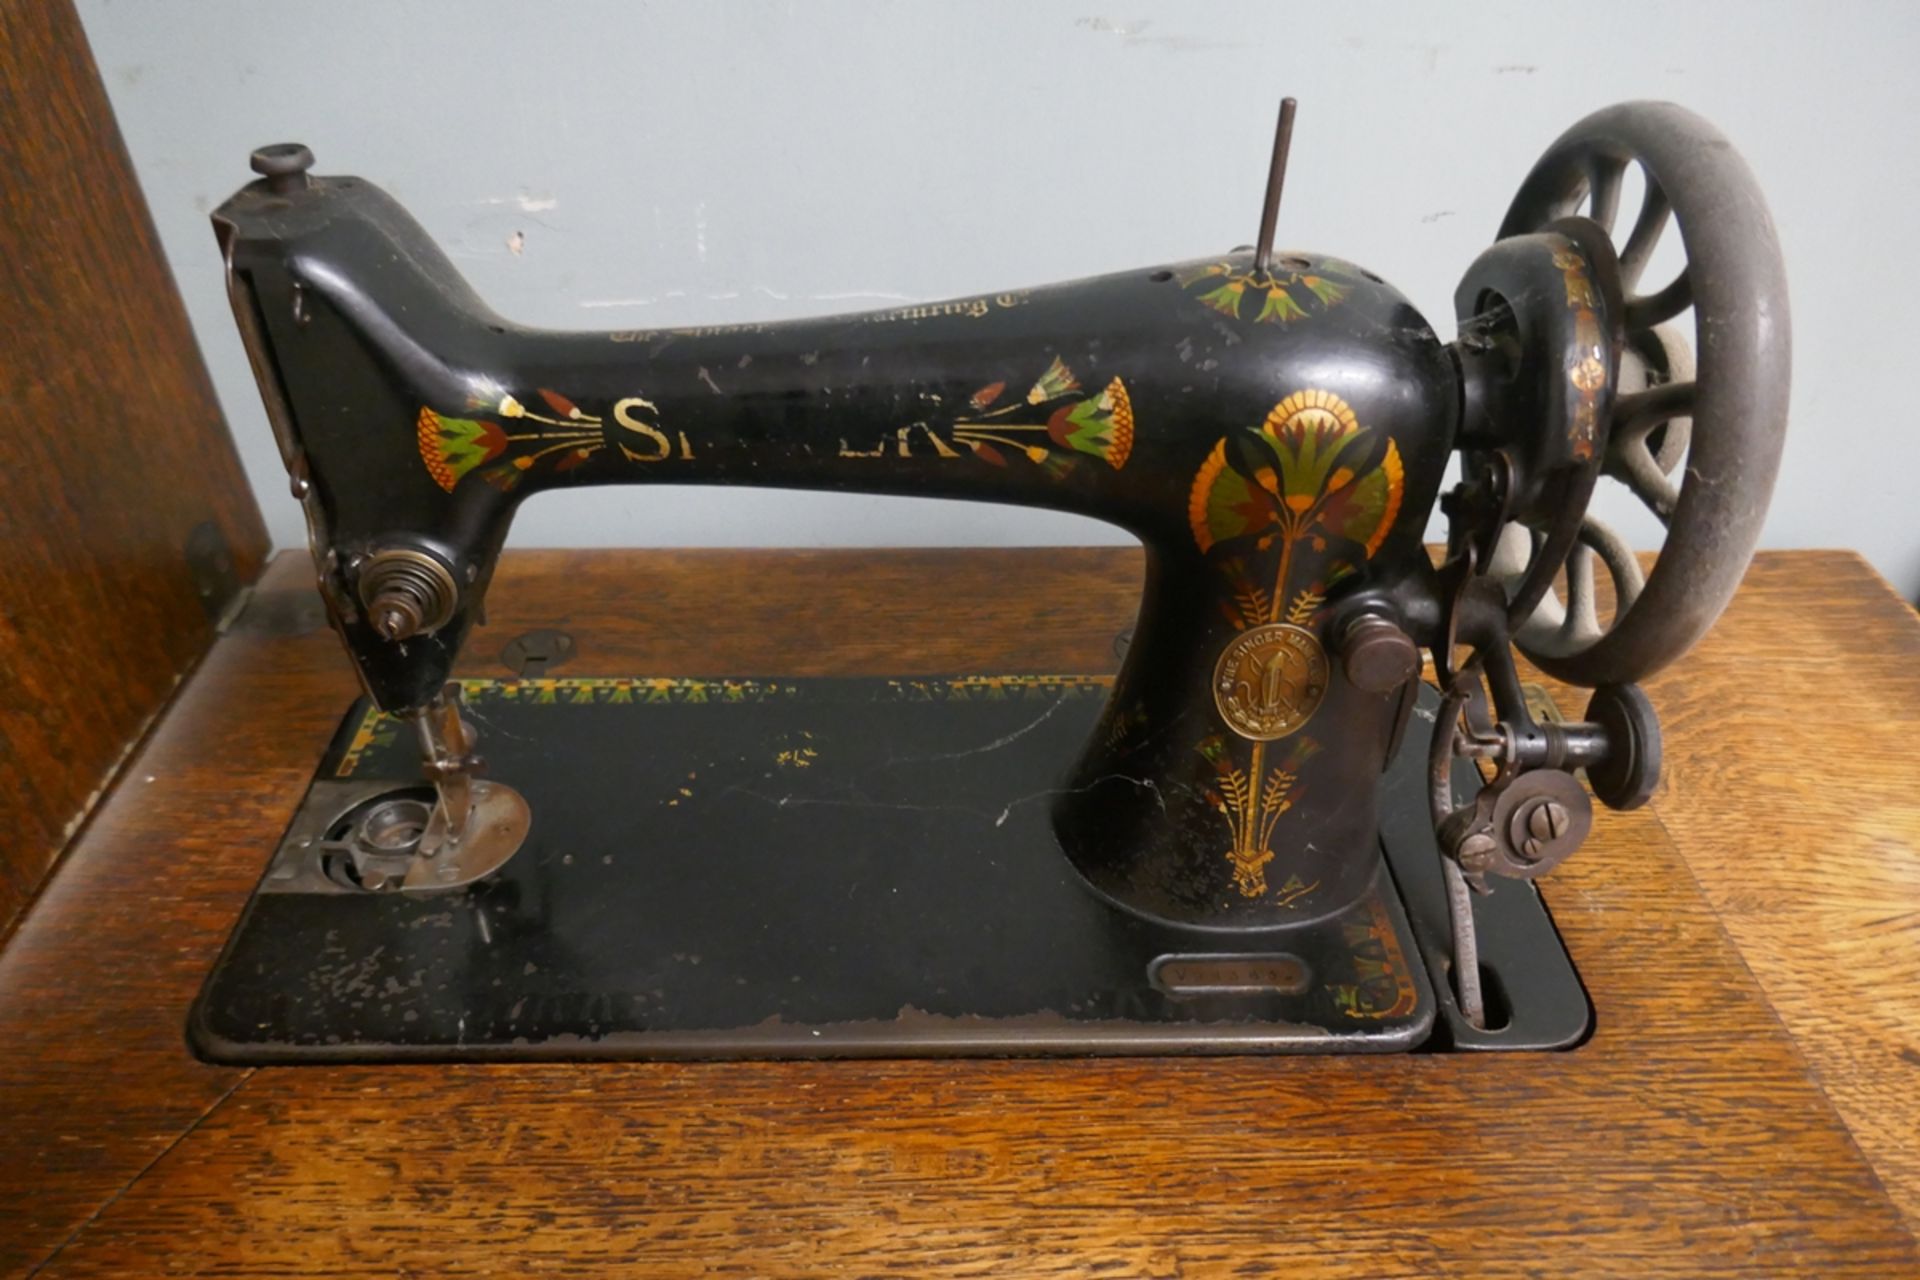 Singer sewing machine table - Image 3 of 5